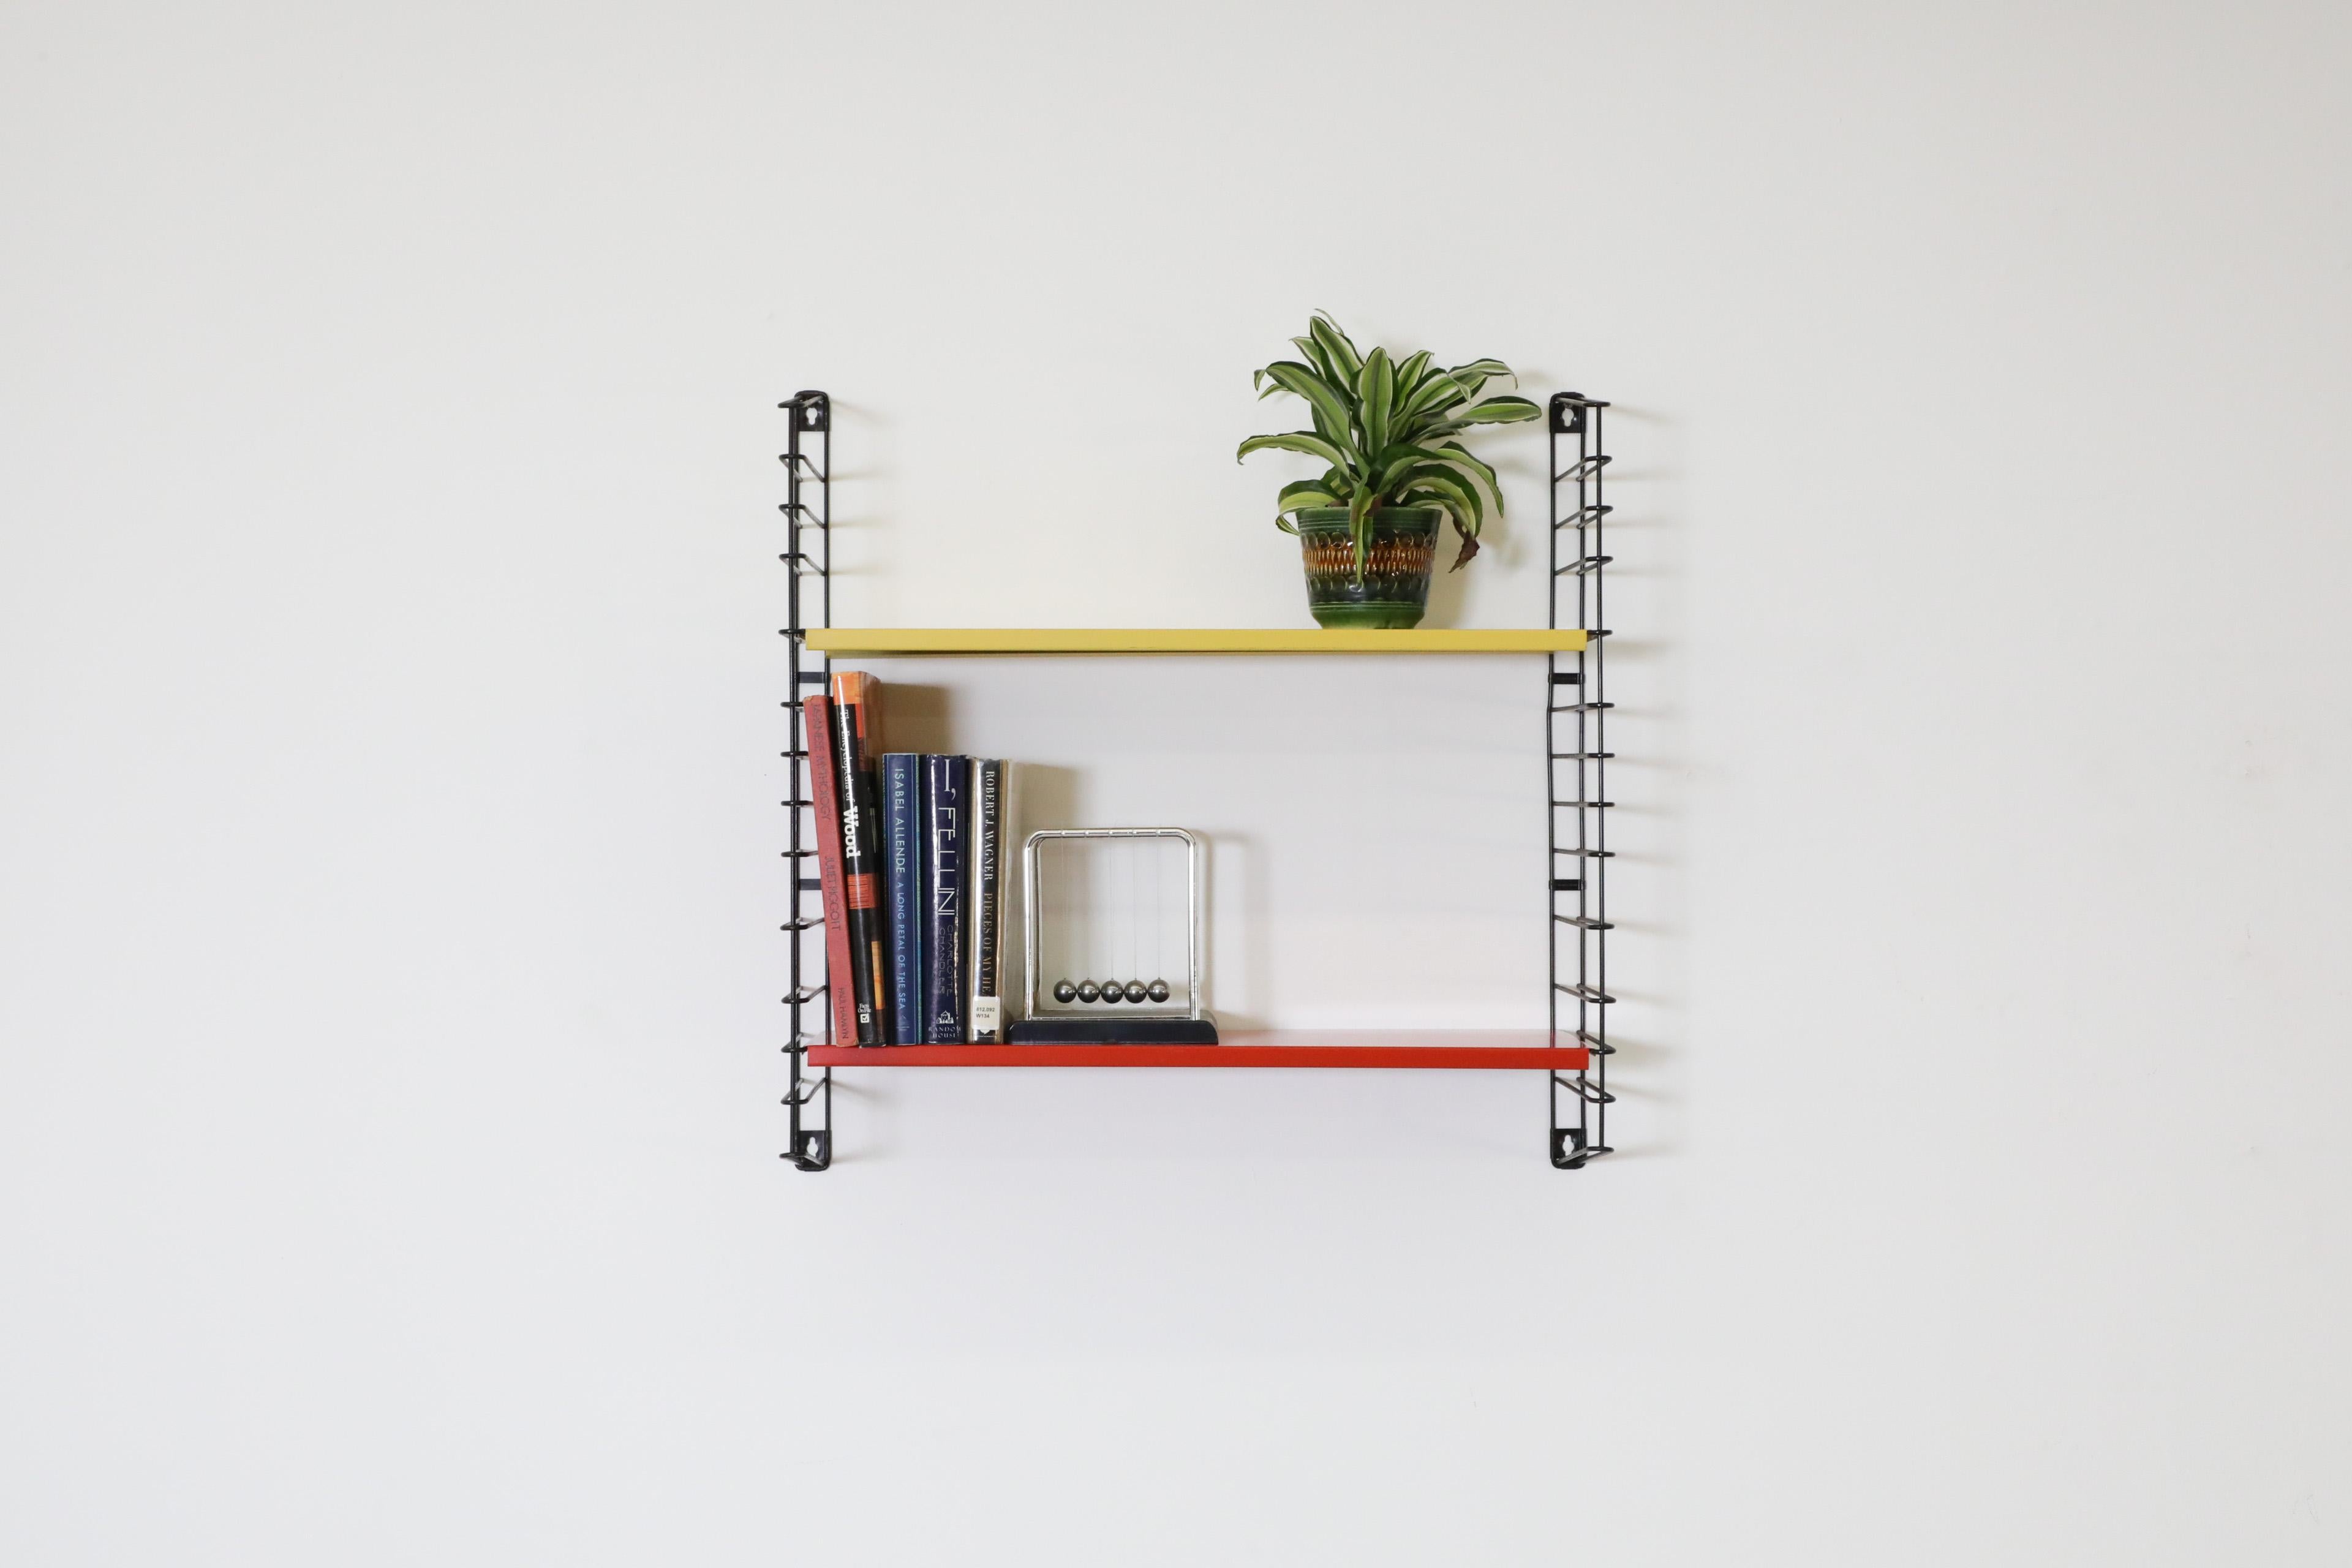 Dutch Mid-Century single section industrial style wall mounted shelving by the iconic Tomado company. Features Yellow and red enameled metal shelves on black wire risers with some visible wear consistent with age and use. Perfect for books or